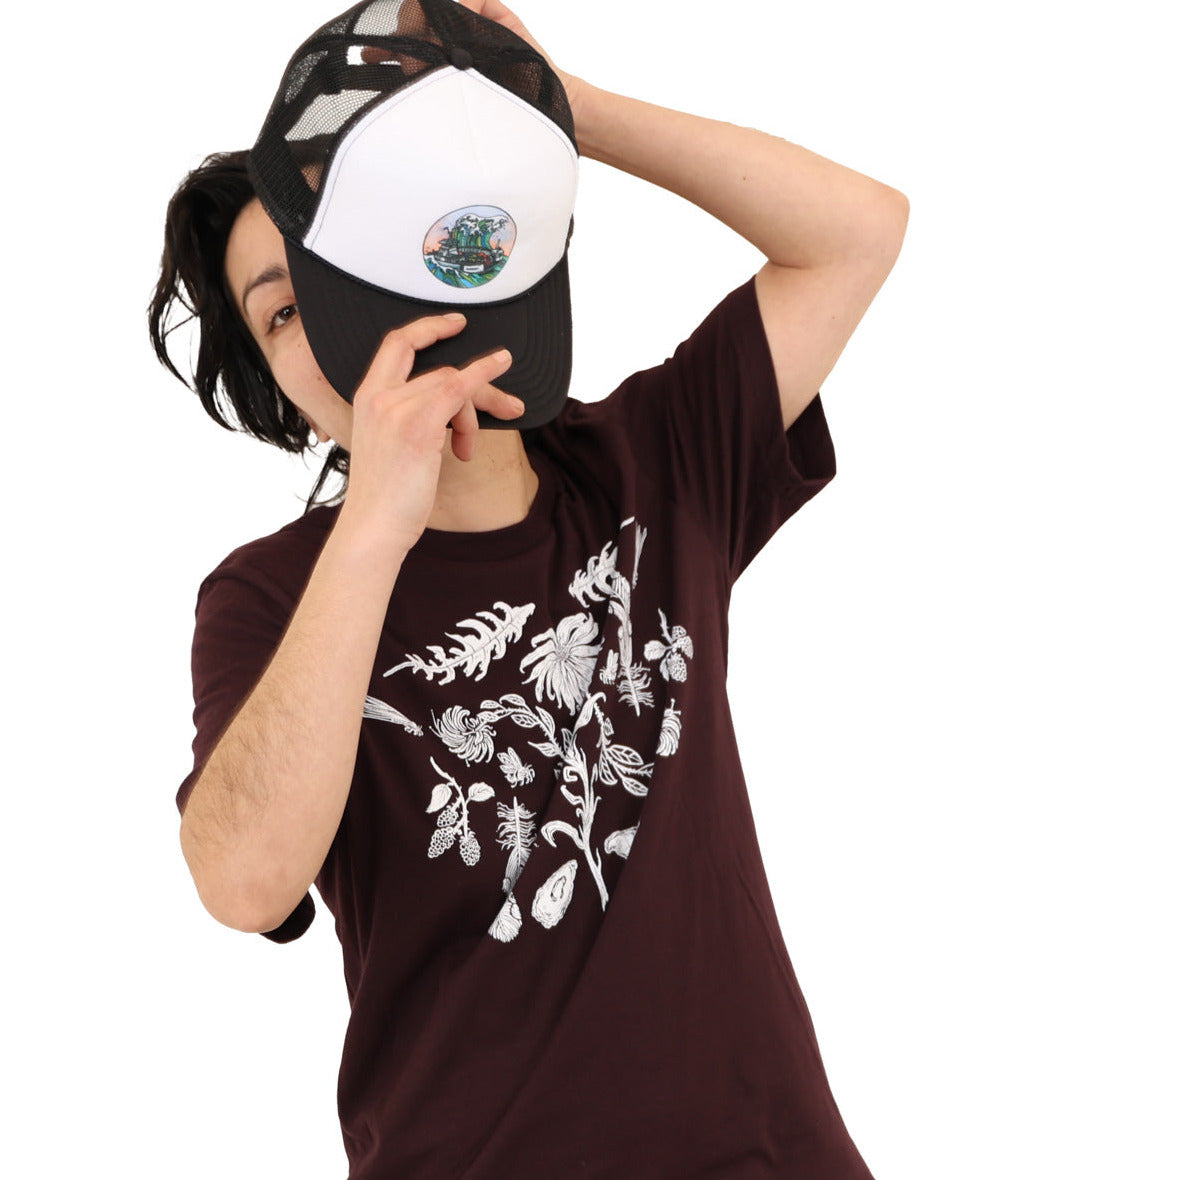 Woman wearing a oxblood colored t-shirt with white ink of flowers, ferns, feathers, shells, etc. Woman has hat half way over her face